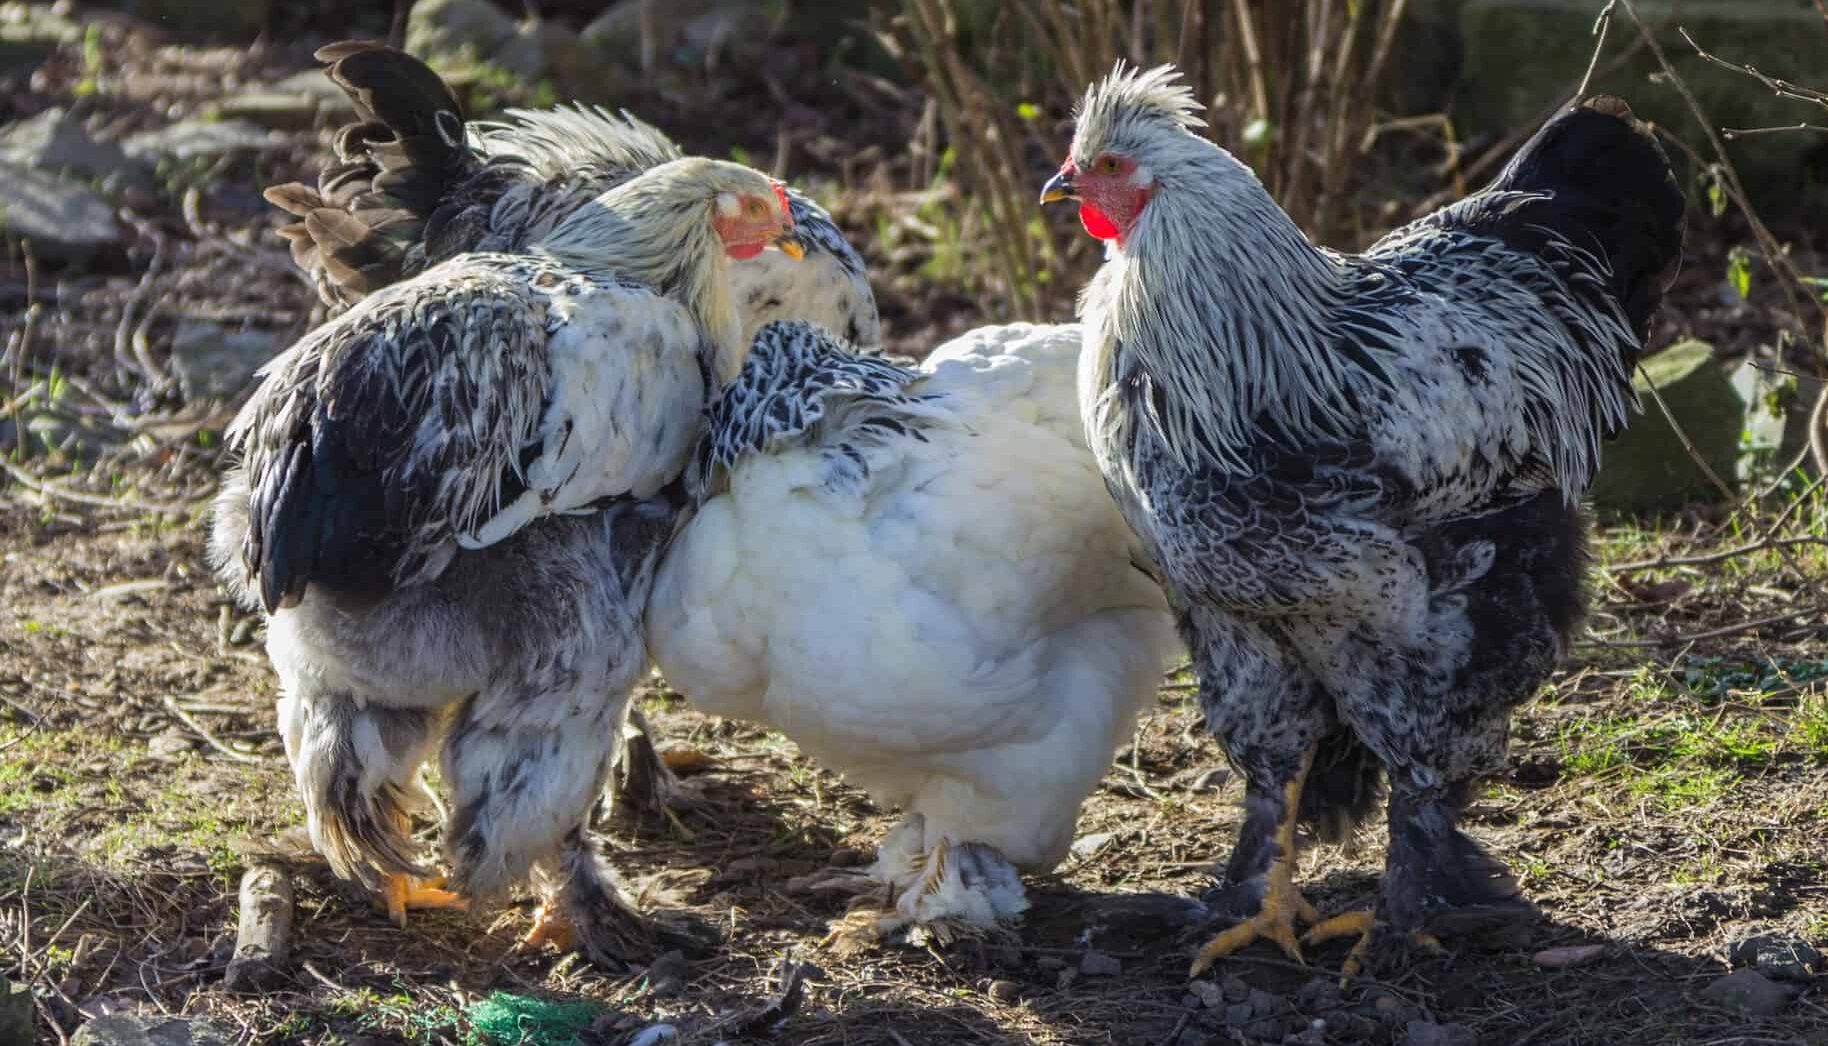 Brahma Chicken: Raise This Giant Chicken for Eggs and Meat